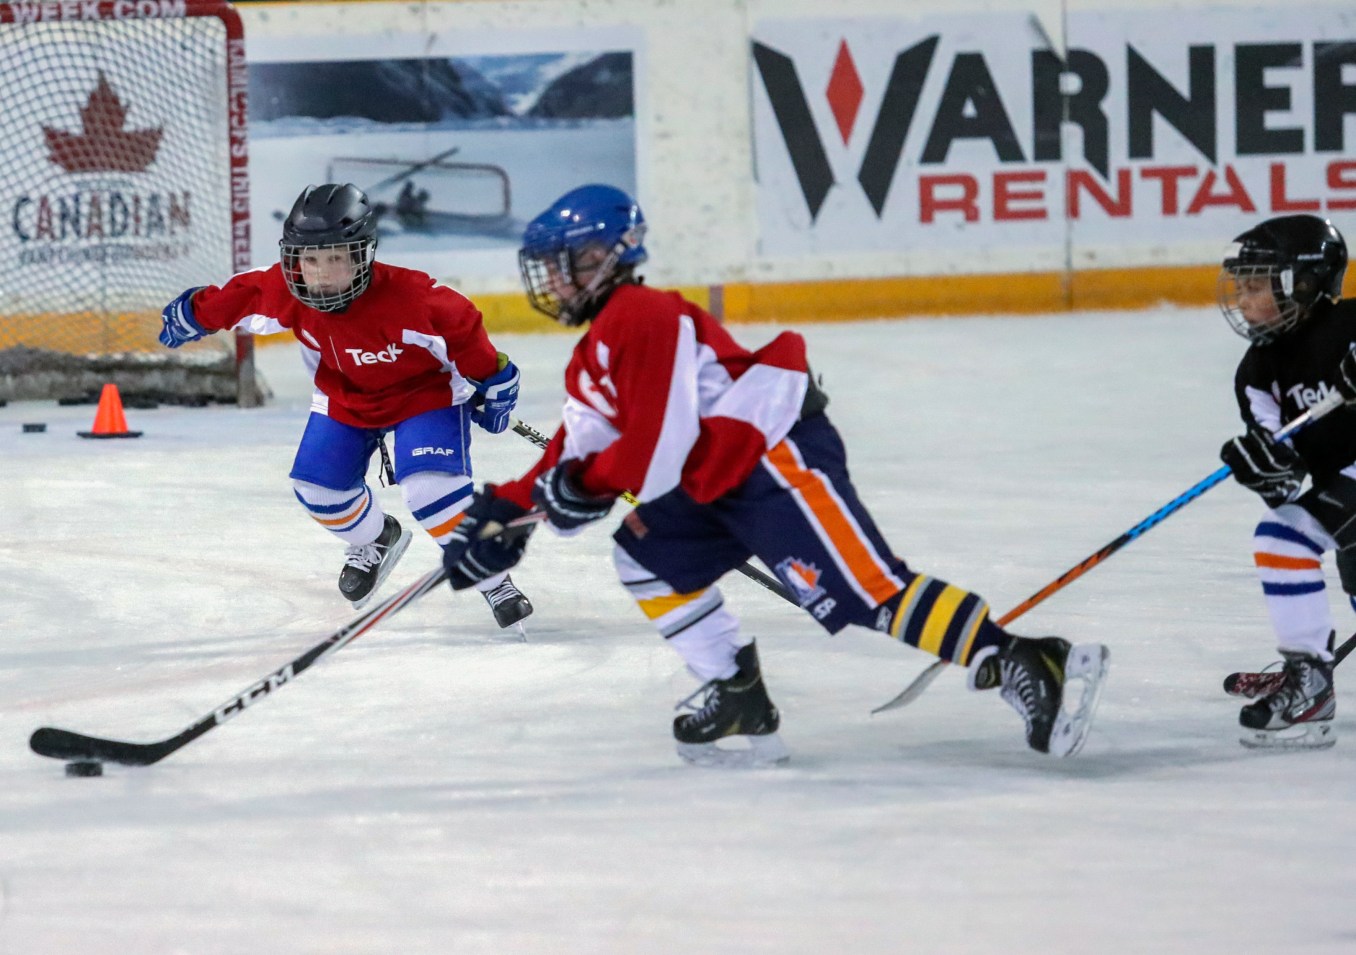 Kids participate in the Teck Coaching Series in Kamloops, BC on December 3, 2016 (photo: Allen Douglas)